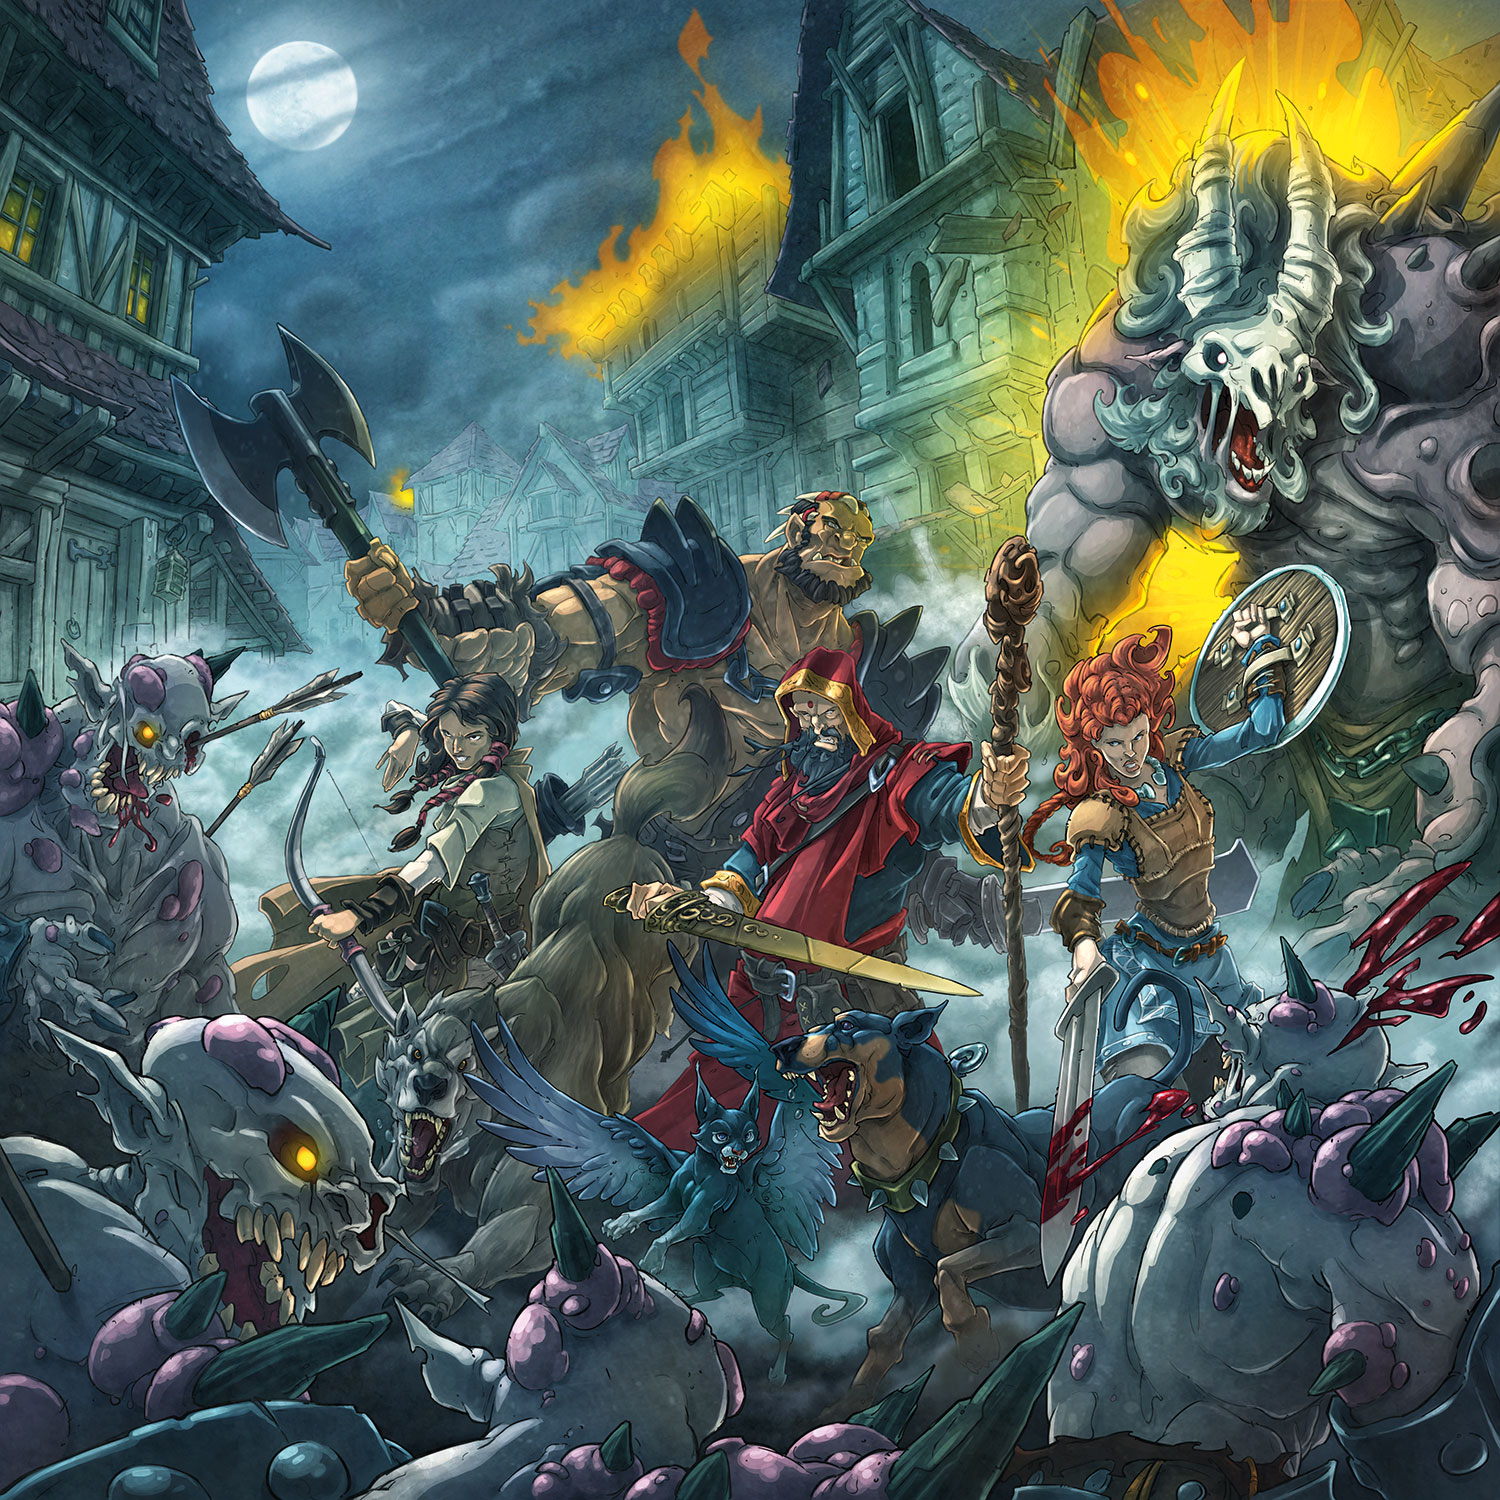 Zombicide Friends and Foes